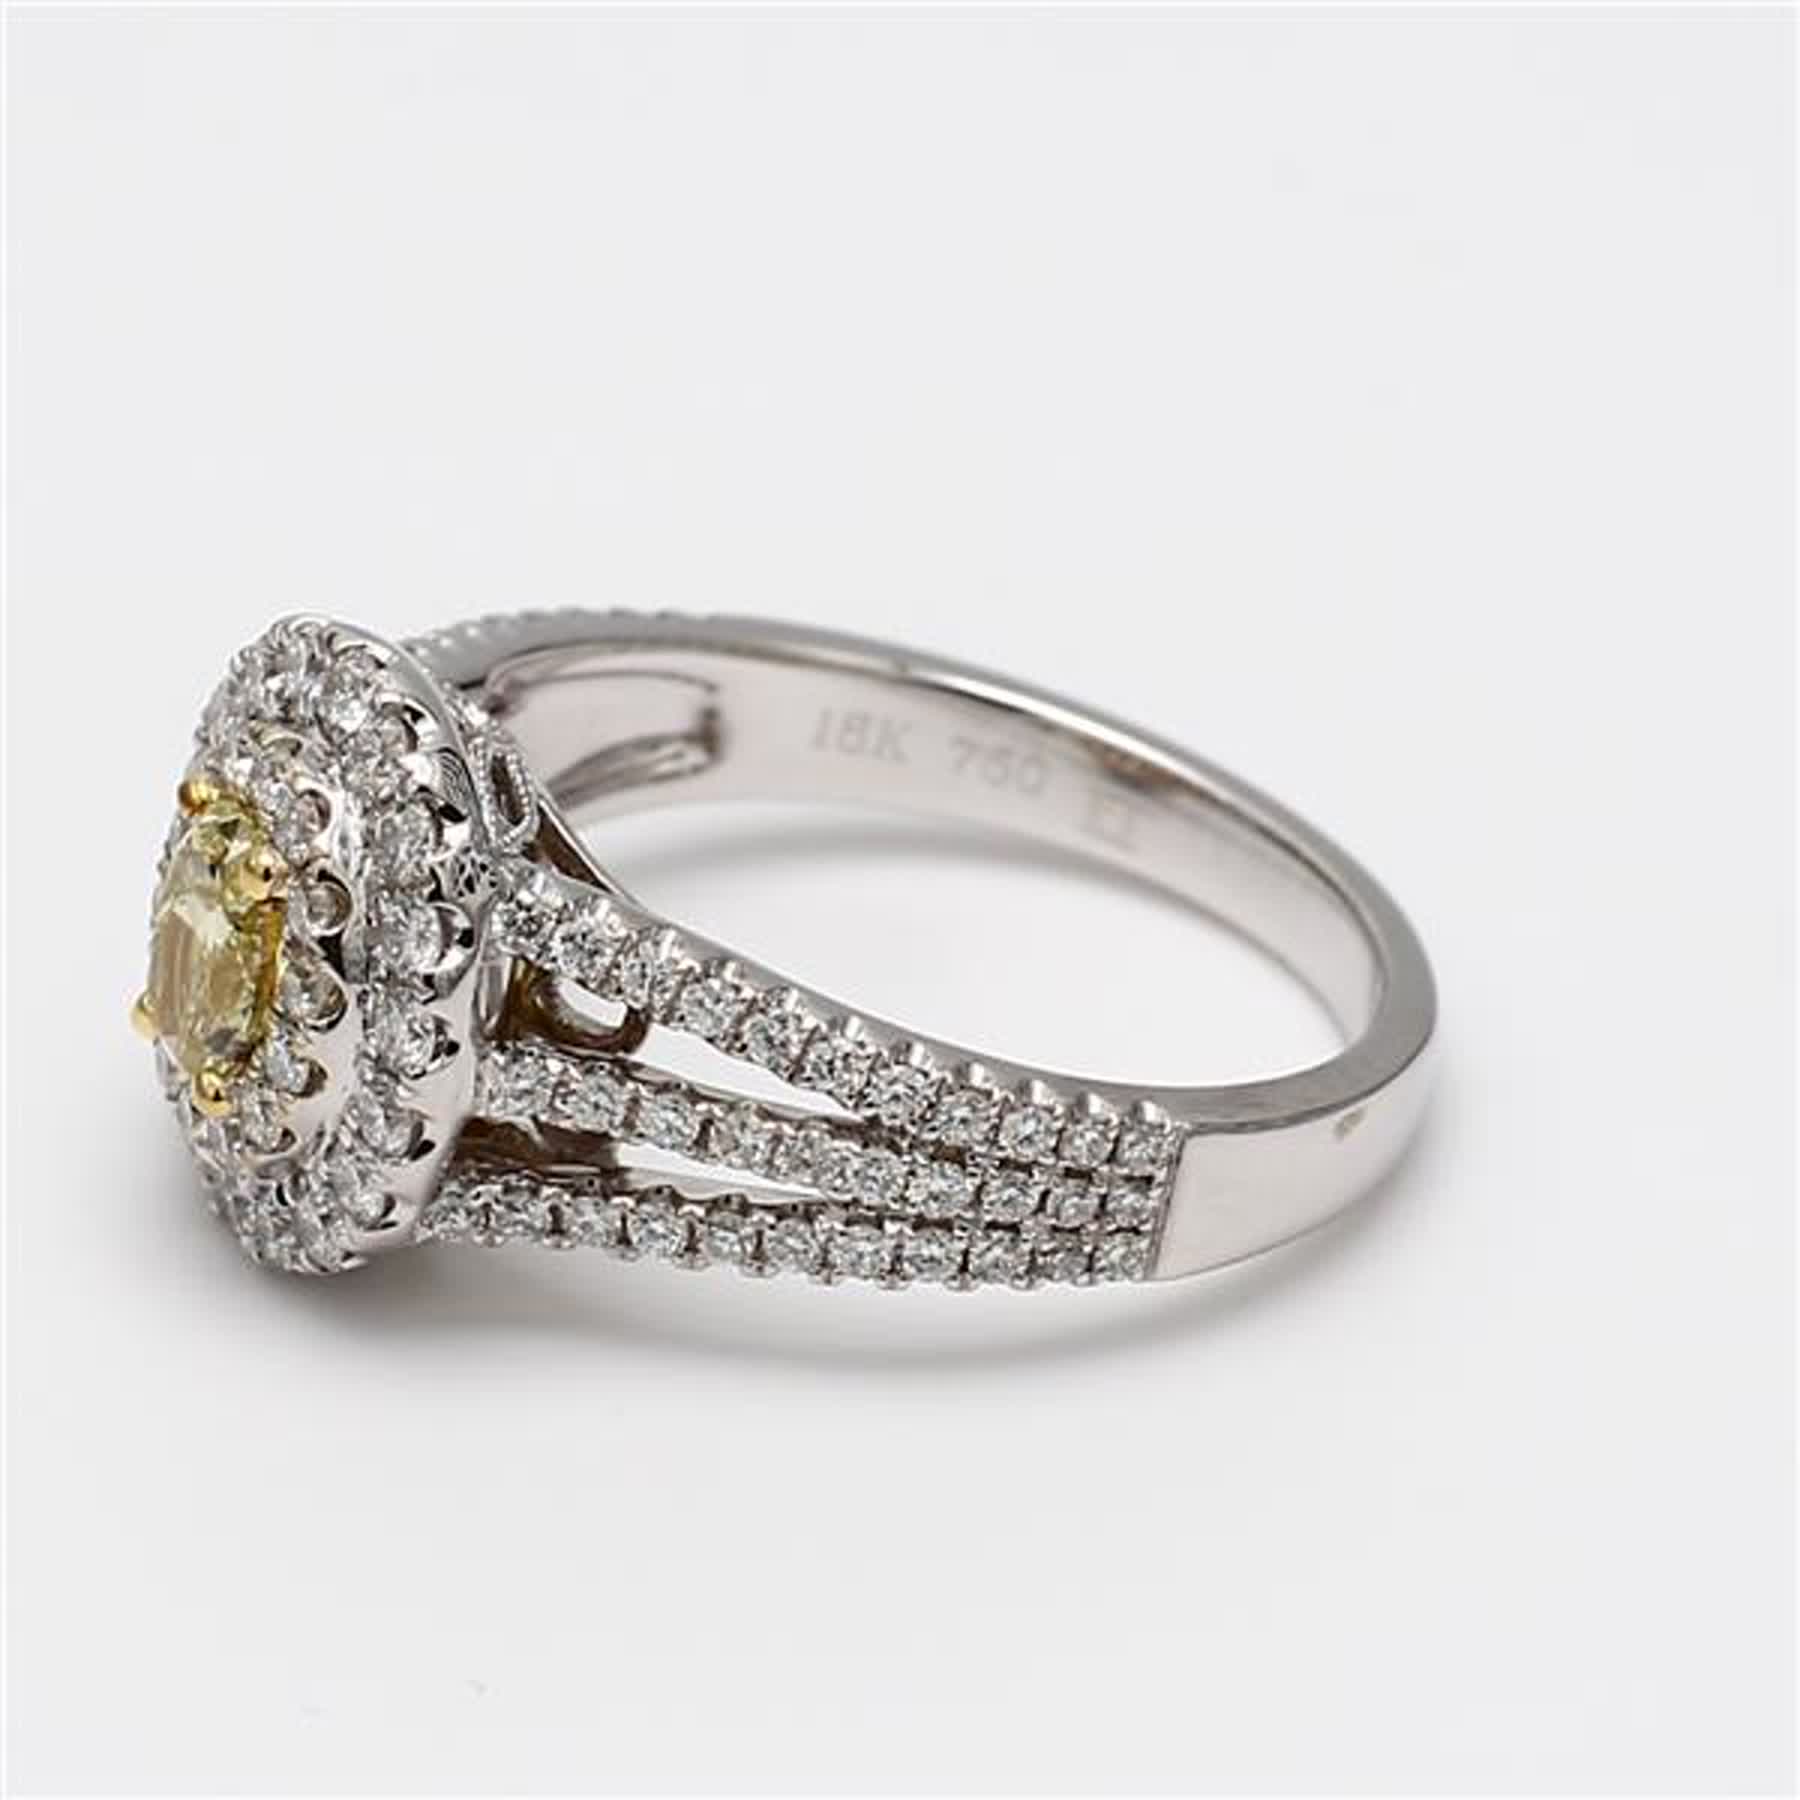 Natural Yellow Oval and White Diamond 1.16 Carat TW Gold Cocktail Ring